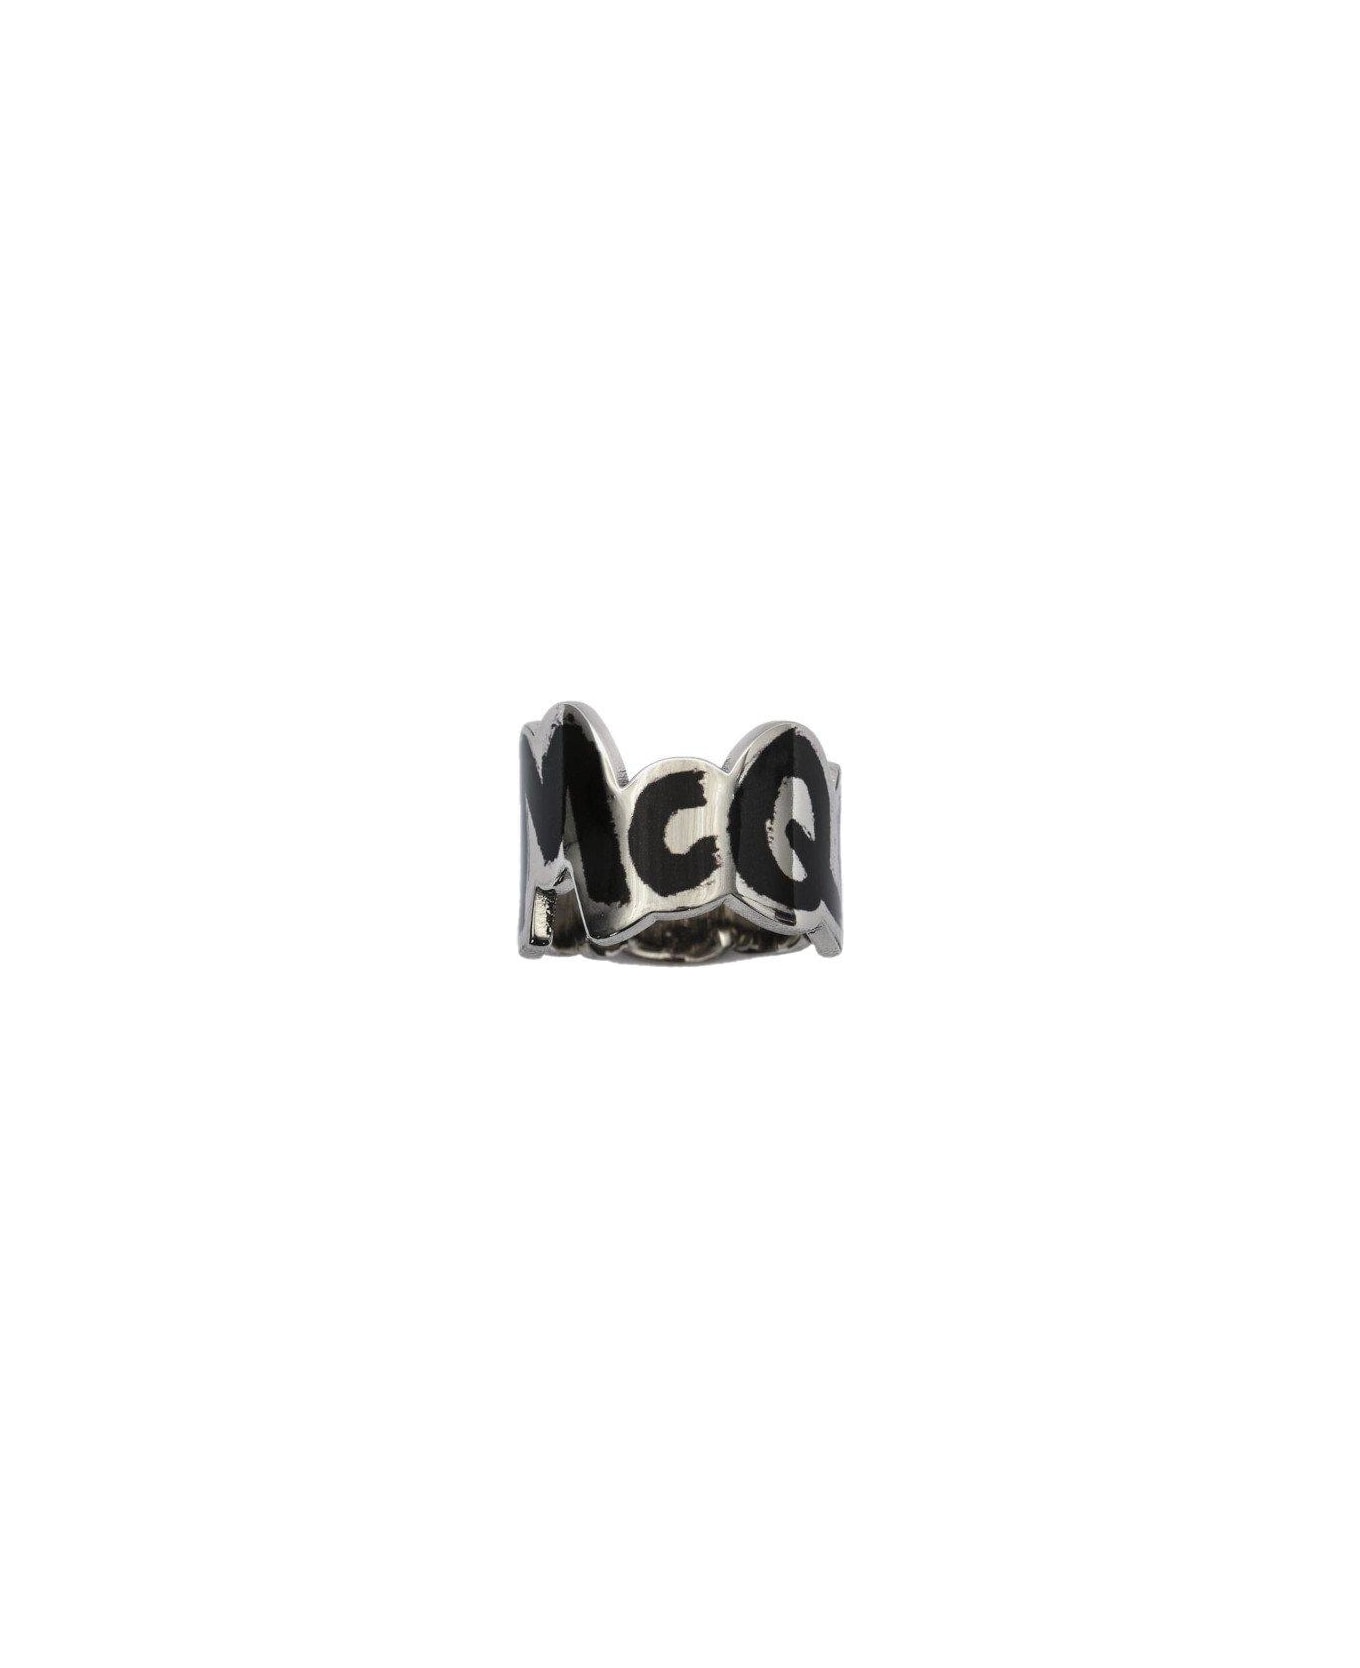 Alexander McQueen Logo Engraved Cut Out Ring - Nero